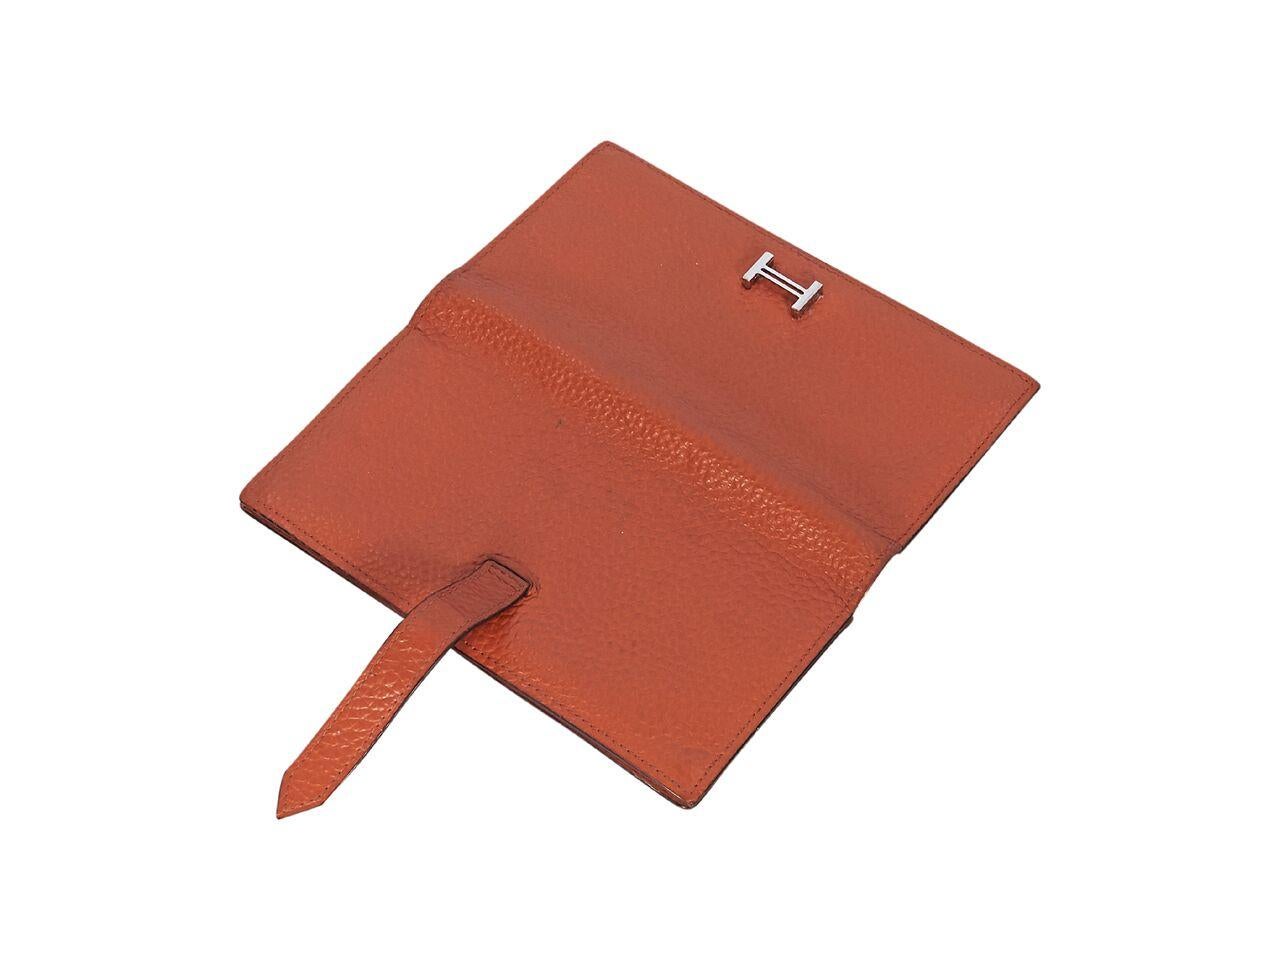 Product details:  Orange Bearn epsom pebbled leather wallet by Hermes.  Tab closure.  Leather interior with zip coin pouch, multiple credit card slots and bill compartments.  Silvertone hardware.  Original box included. 
Condition: Pre-owned. Very